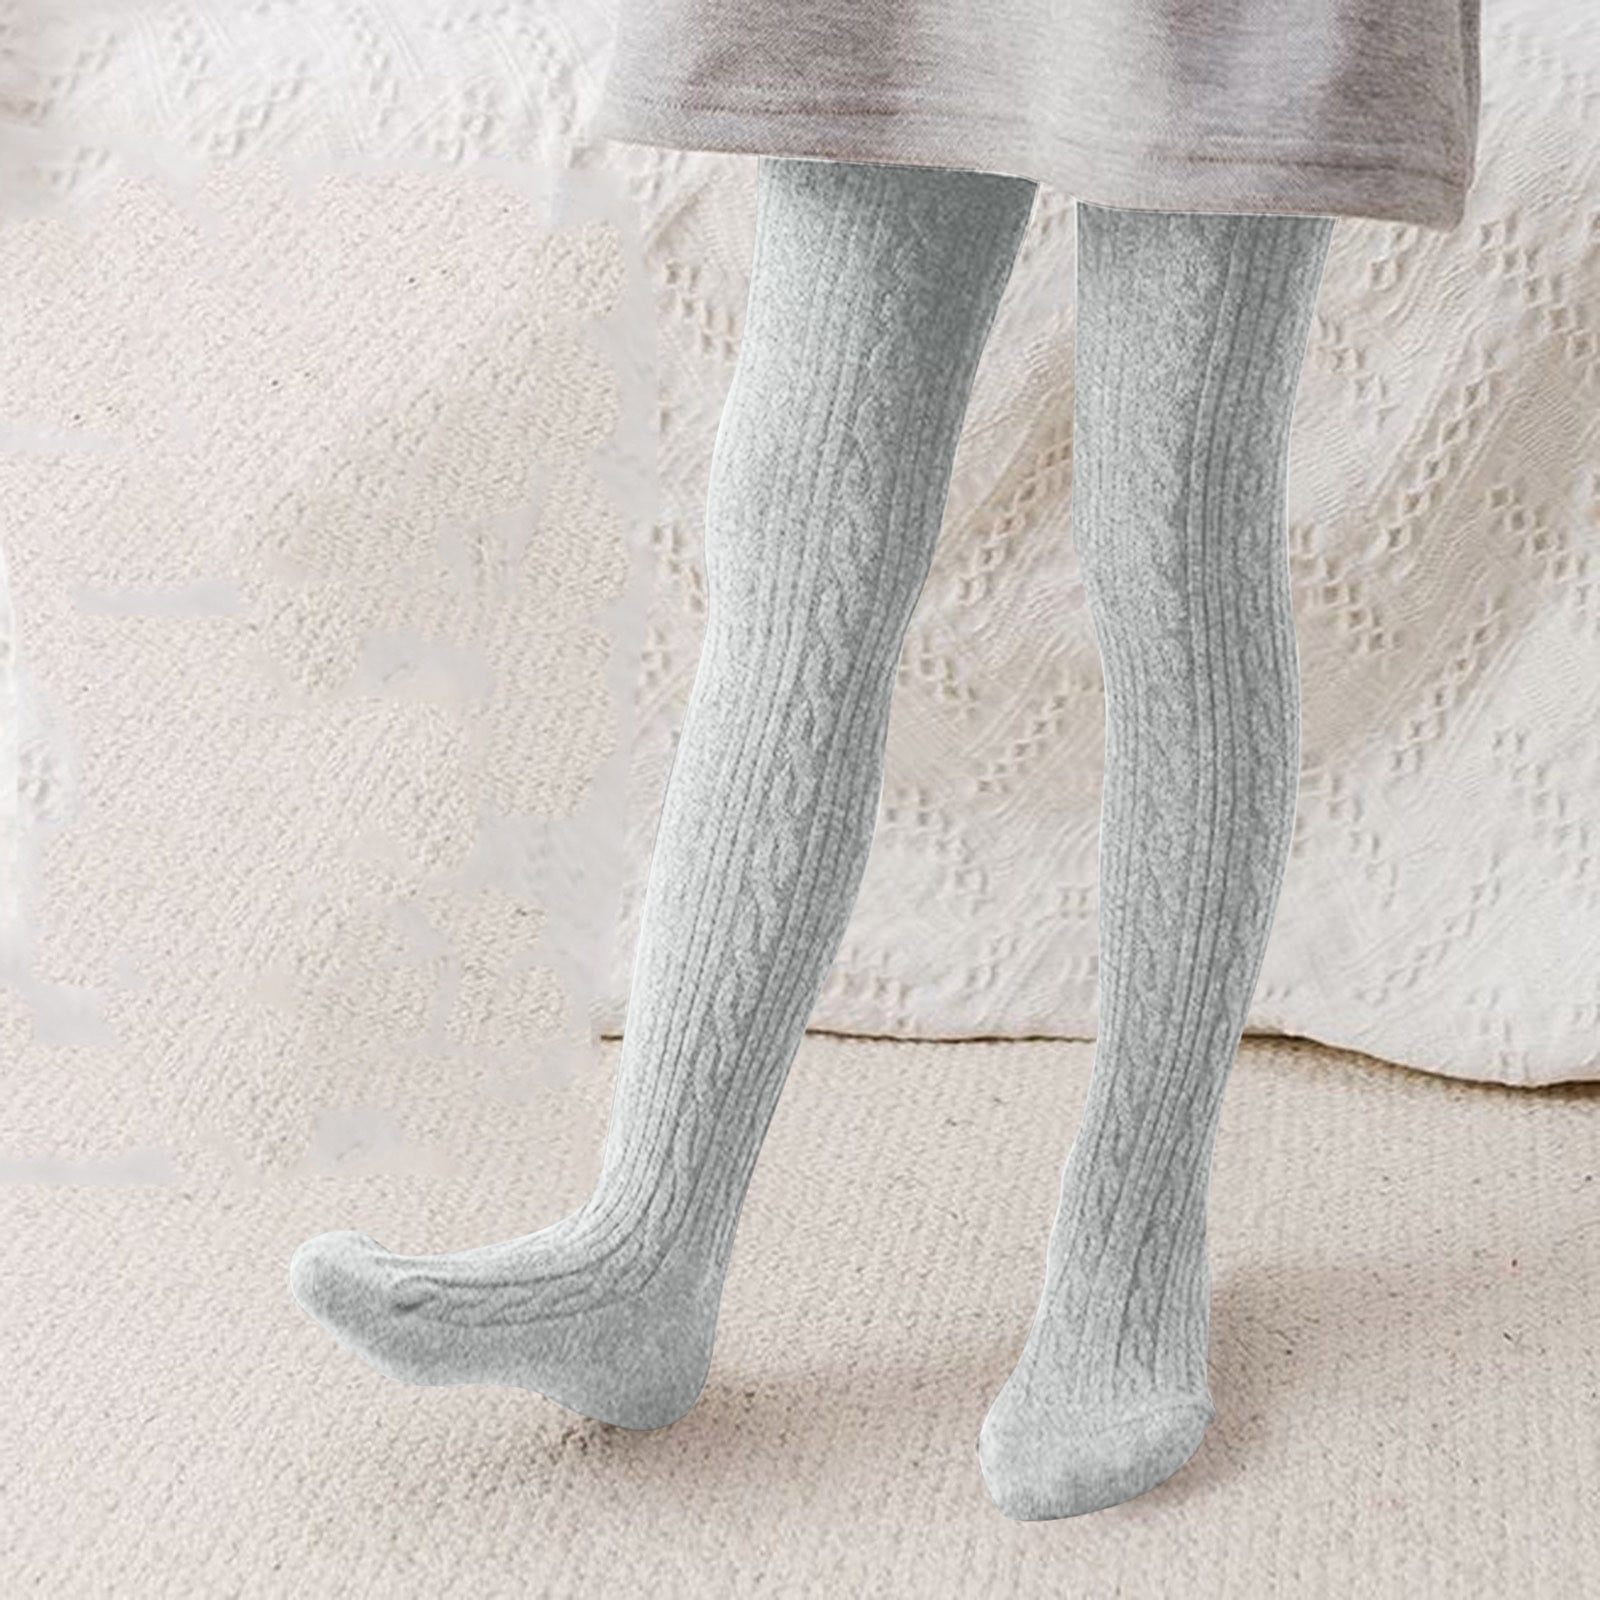 2DXuixsh for Girl Kids Baby Girls Tights Toddler Cable Knit Warm Leggings  Stretchy Stockings Pantyhose Winter Socks Big Girls Dress Pants Polyester  Grey Xl 